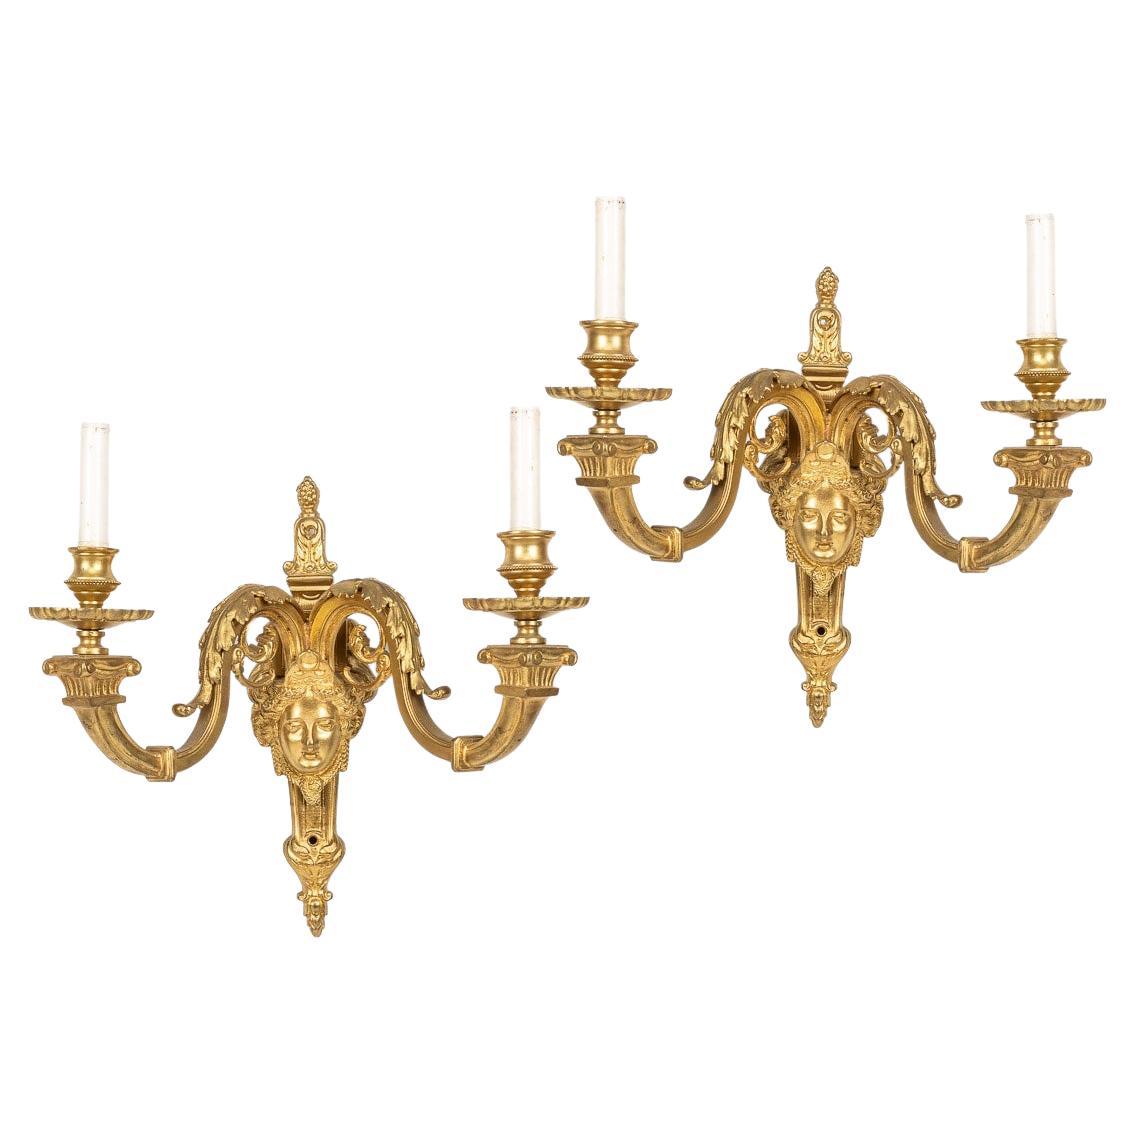 19th Century French Régence Style Ormolu D'appliques Wall Lights, C.1830